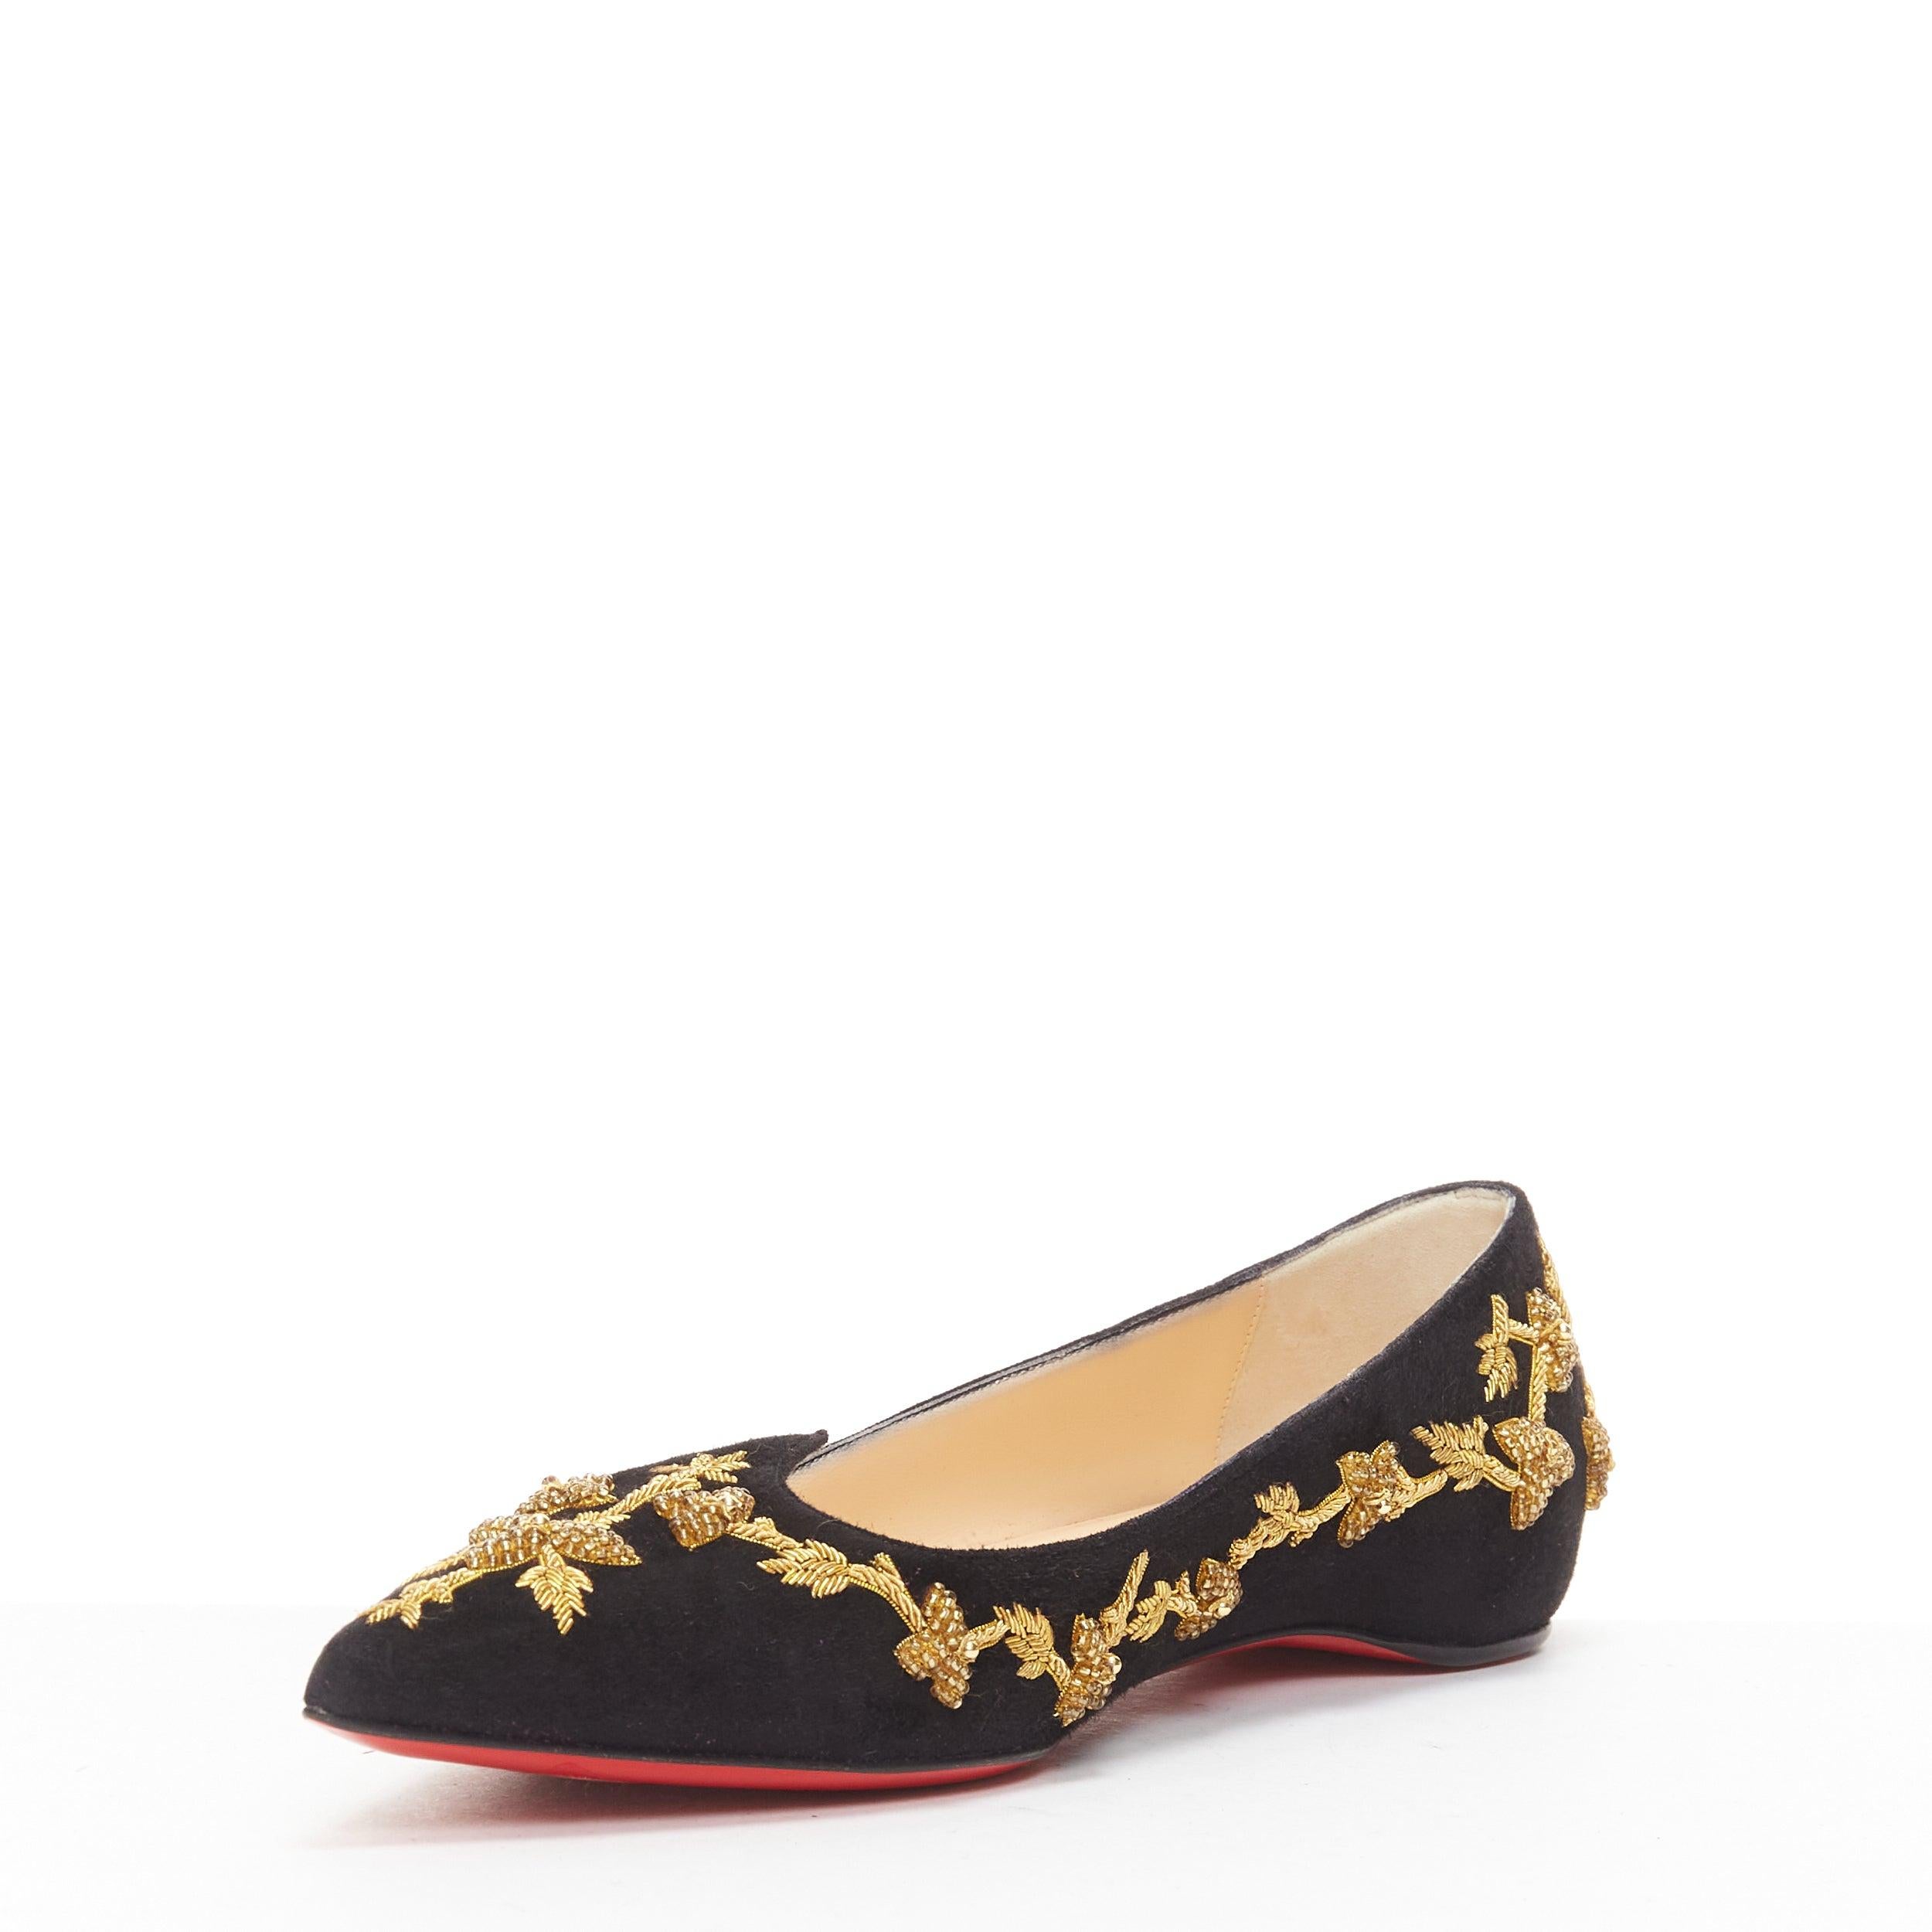 Women's CHRISTIAN LOUBOUTIN black gold embroidery suede leather pointy flats EU35.5 For Sale